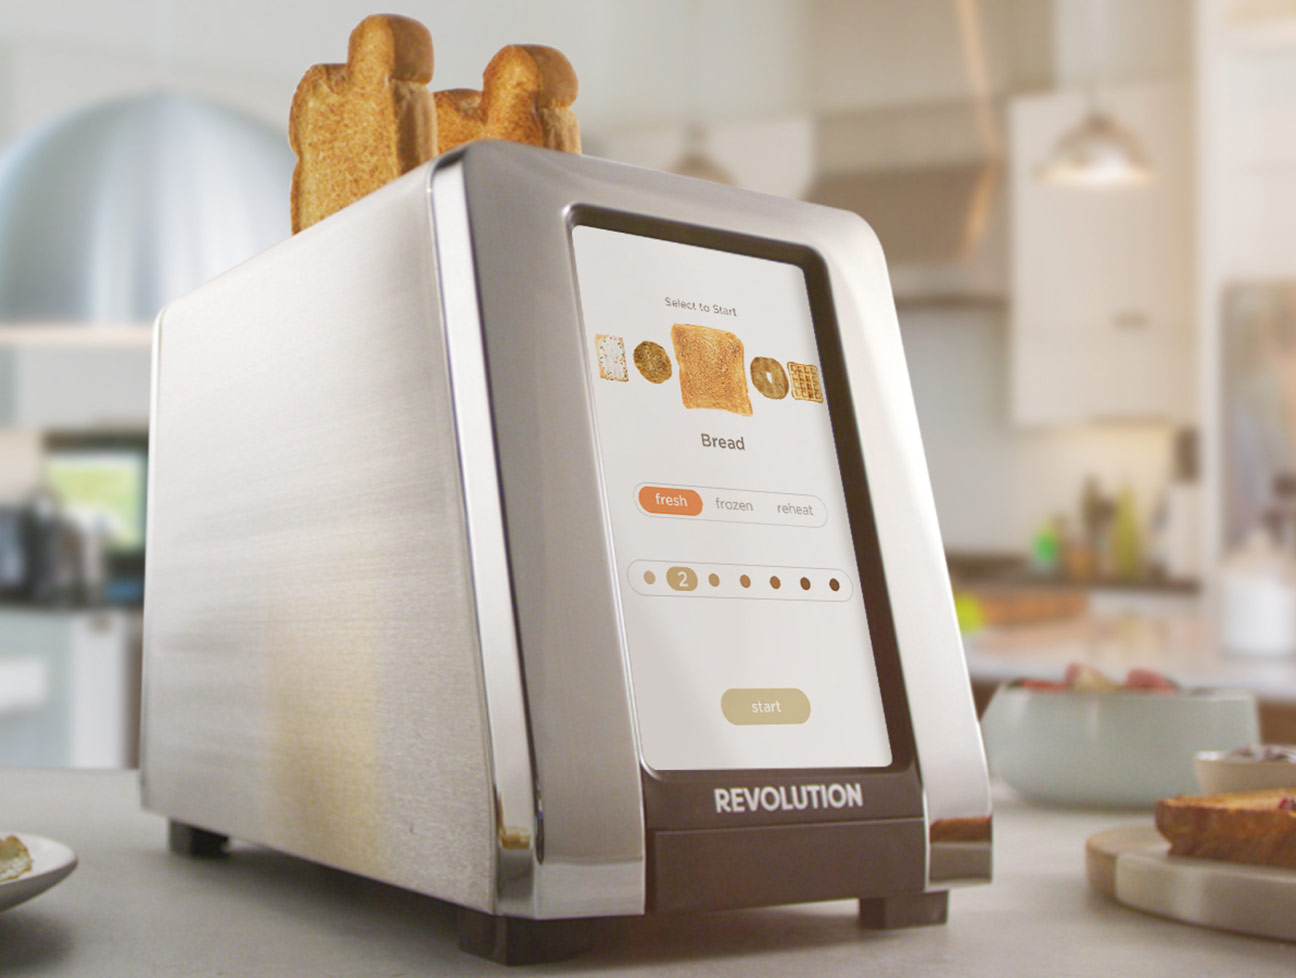 Revolution Toaster sitting on counter, showing touch screen controls.